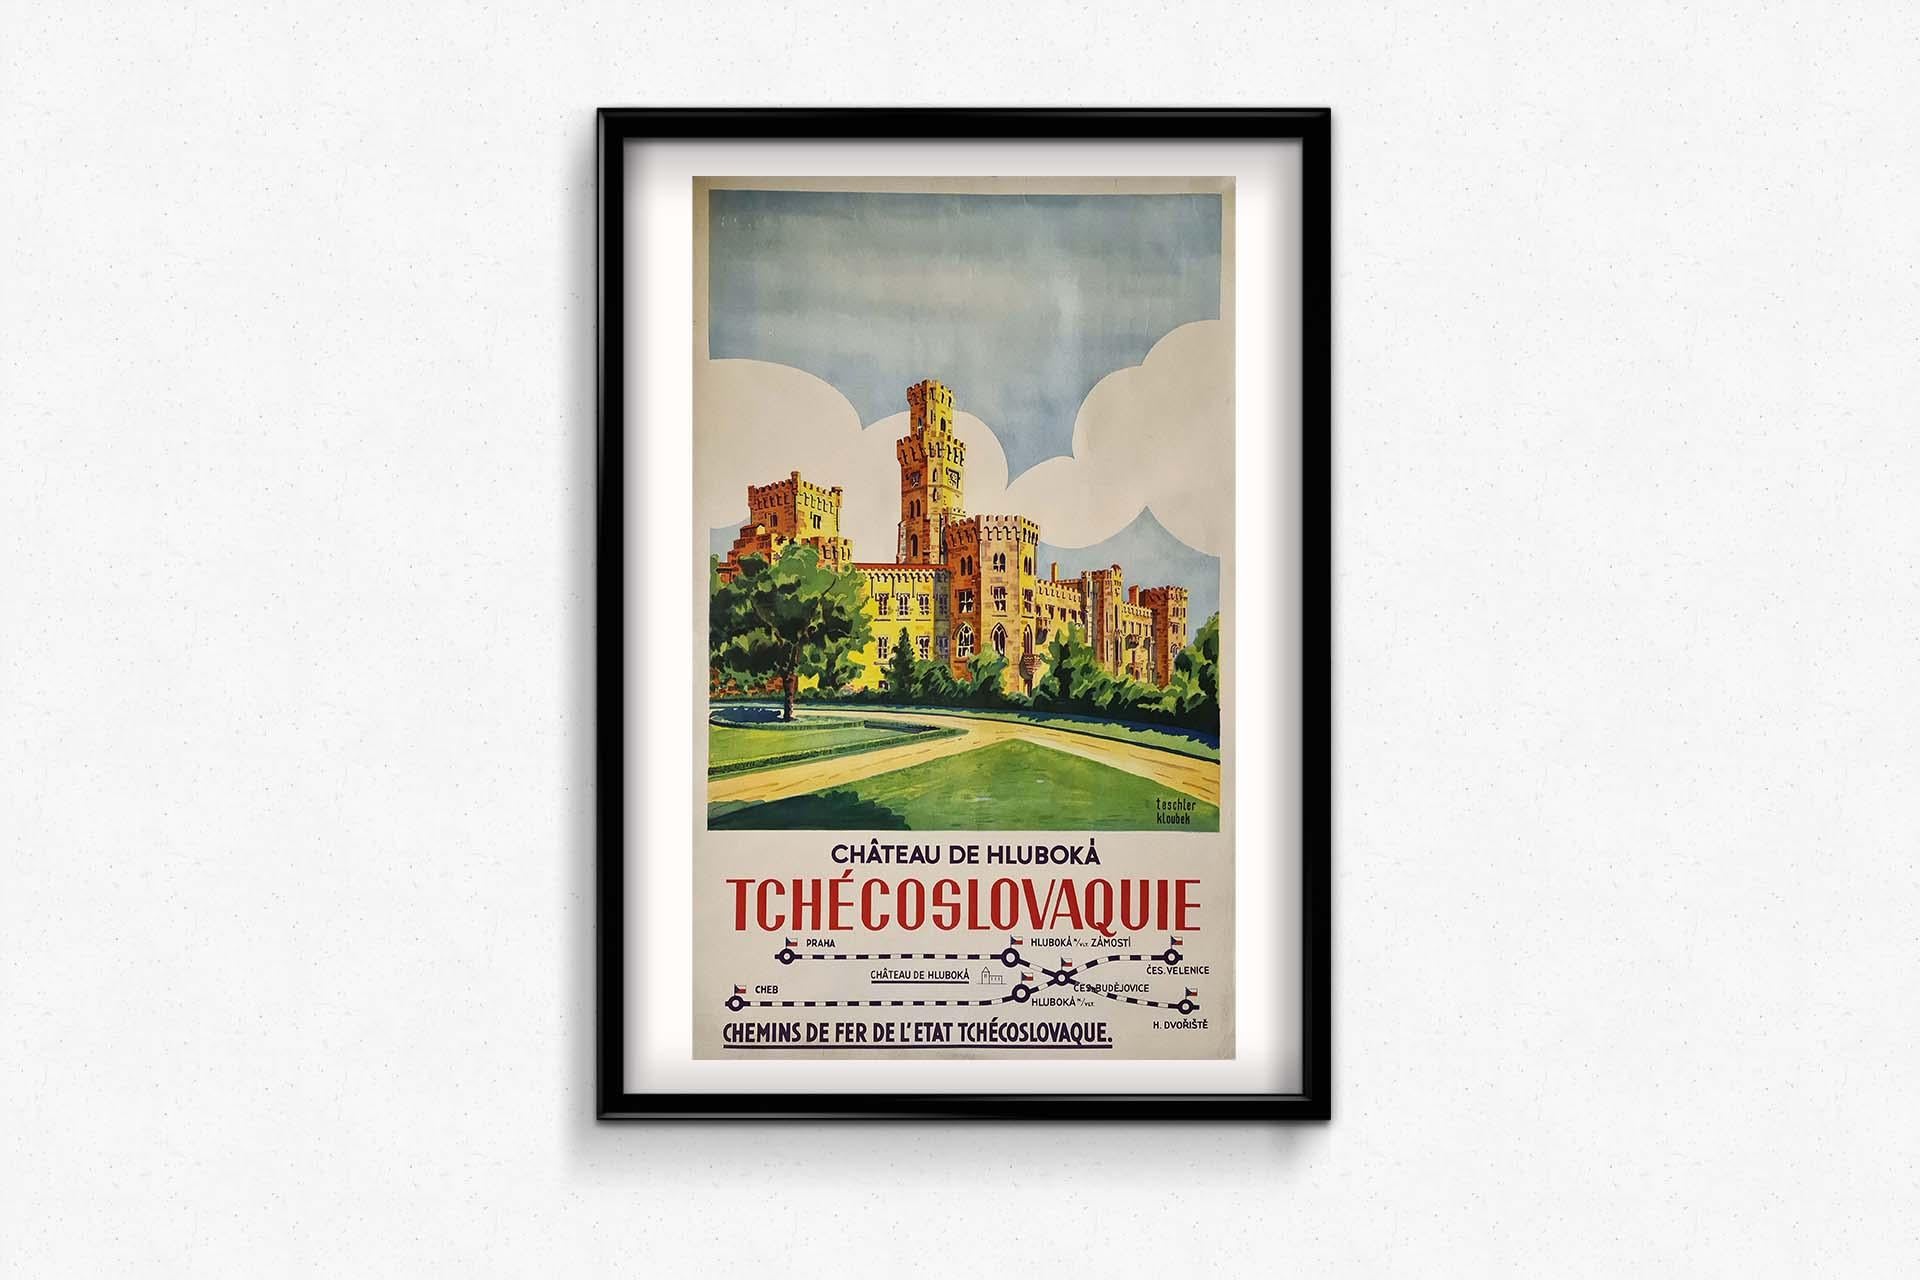 Nice poster of the 30's for the Czechoslovak State Railways. You can see the famous Hluboka Castle. Hluboká Castle is a tourist destination in South Bohemia, it is a neo-Gothic castle.

Railway - Tourism - Czech Republic

Railways of the